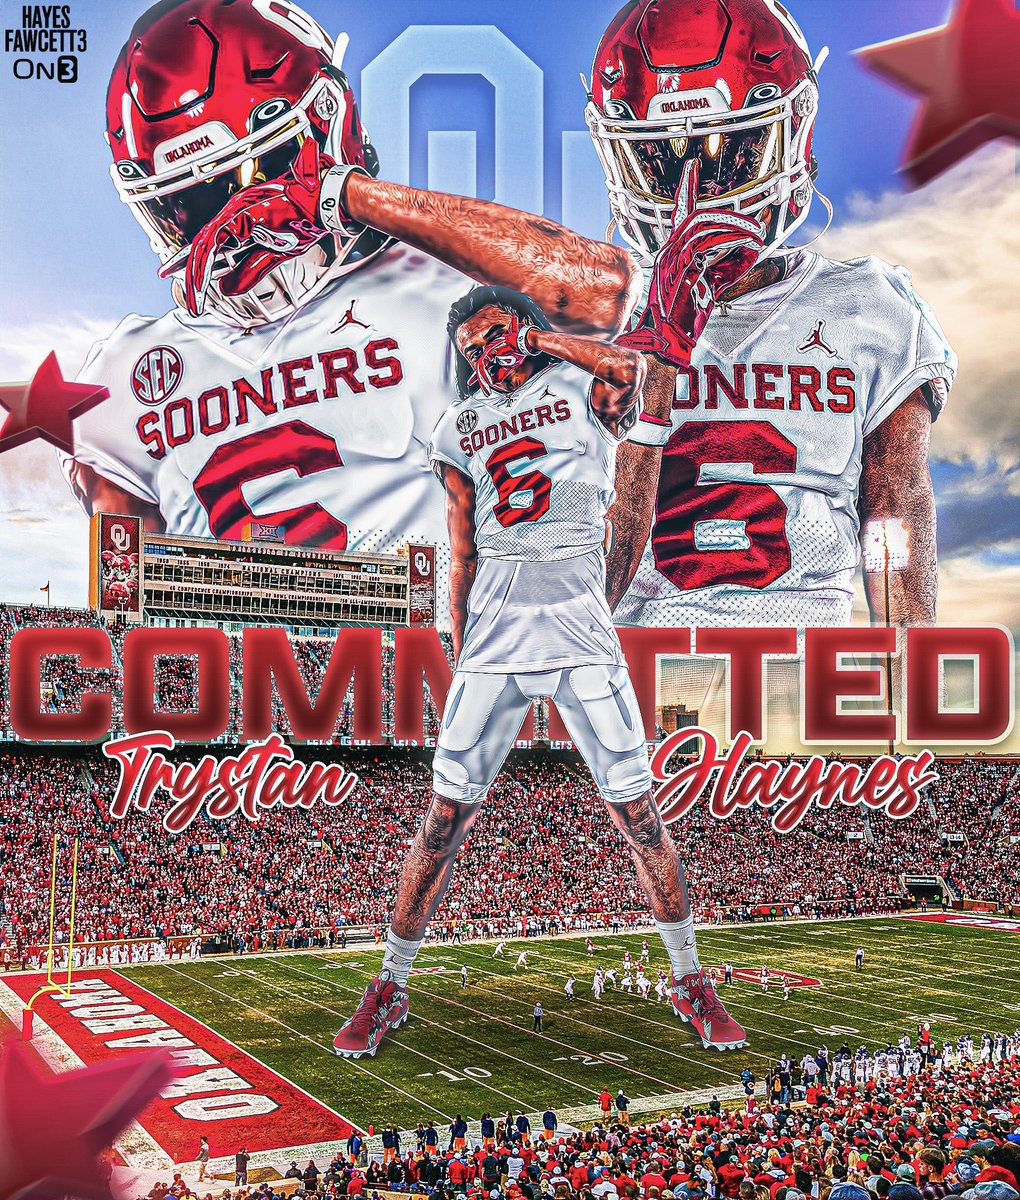 BREAKING: Four-Star CB Trystan Haynes has Committed to Oklahoma, he tells me for @on3recruits The 6’2 175 CB from Midwest City, OK chose the Sooners over Notre Dame, Texas A&M, & Georgia “Just the beginning, Boomer Sooner!!” on3.com/db/trystan-hay…